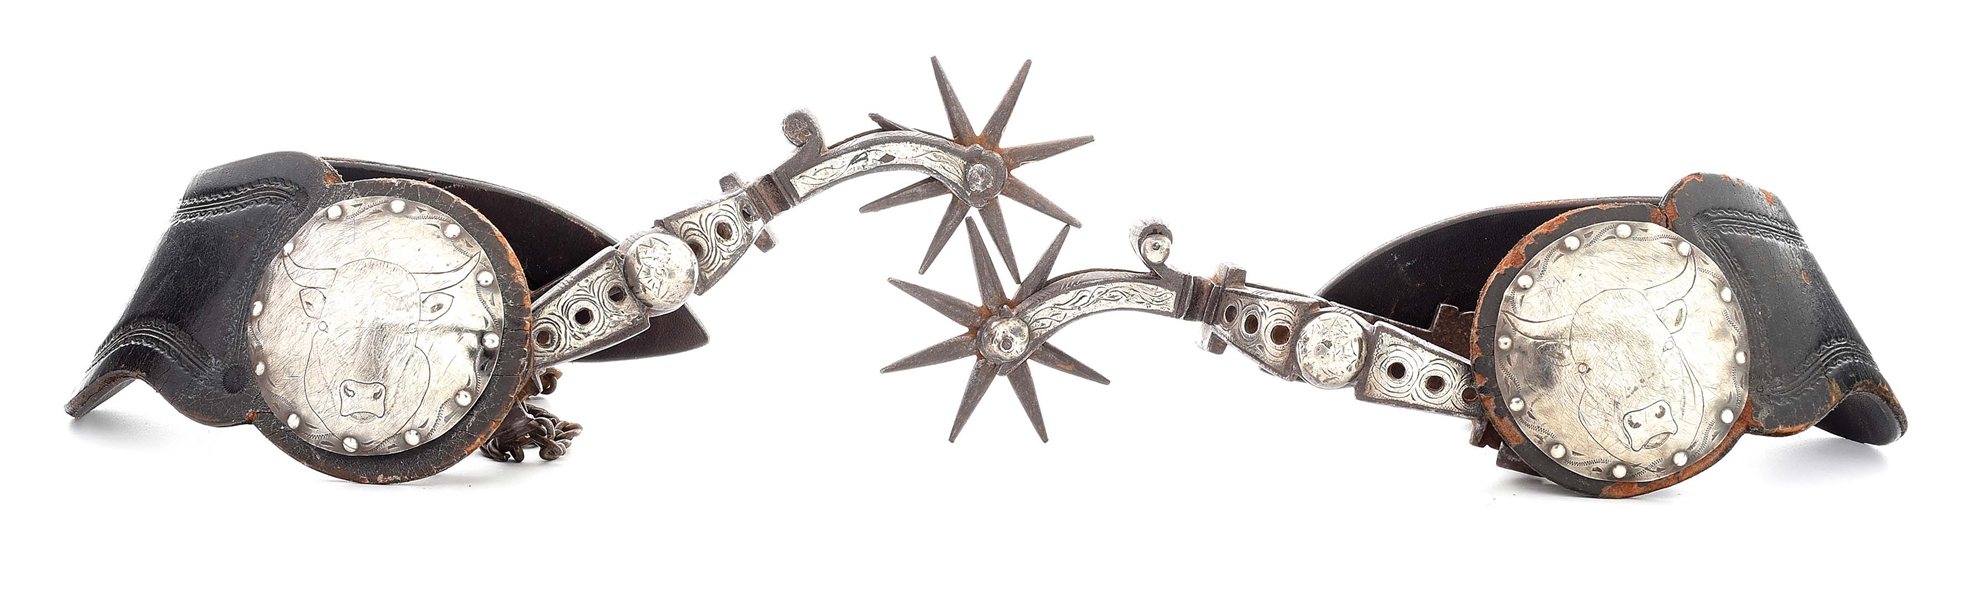 TRANSITIONAL SPURS WITH STEERHEAD CONCHOS